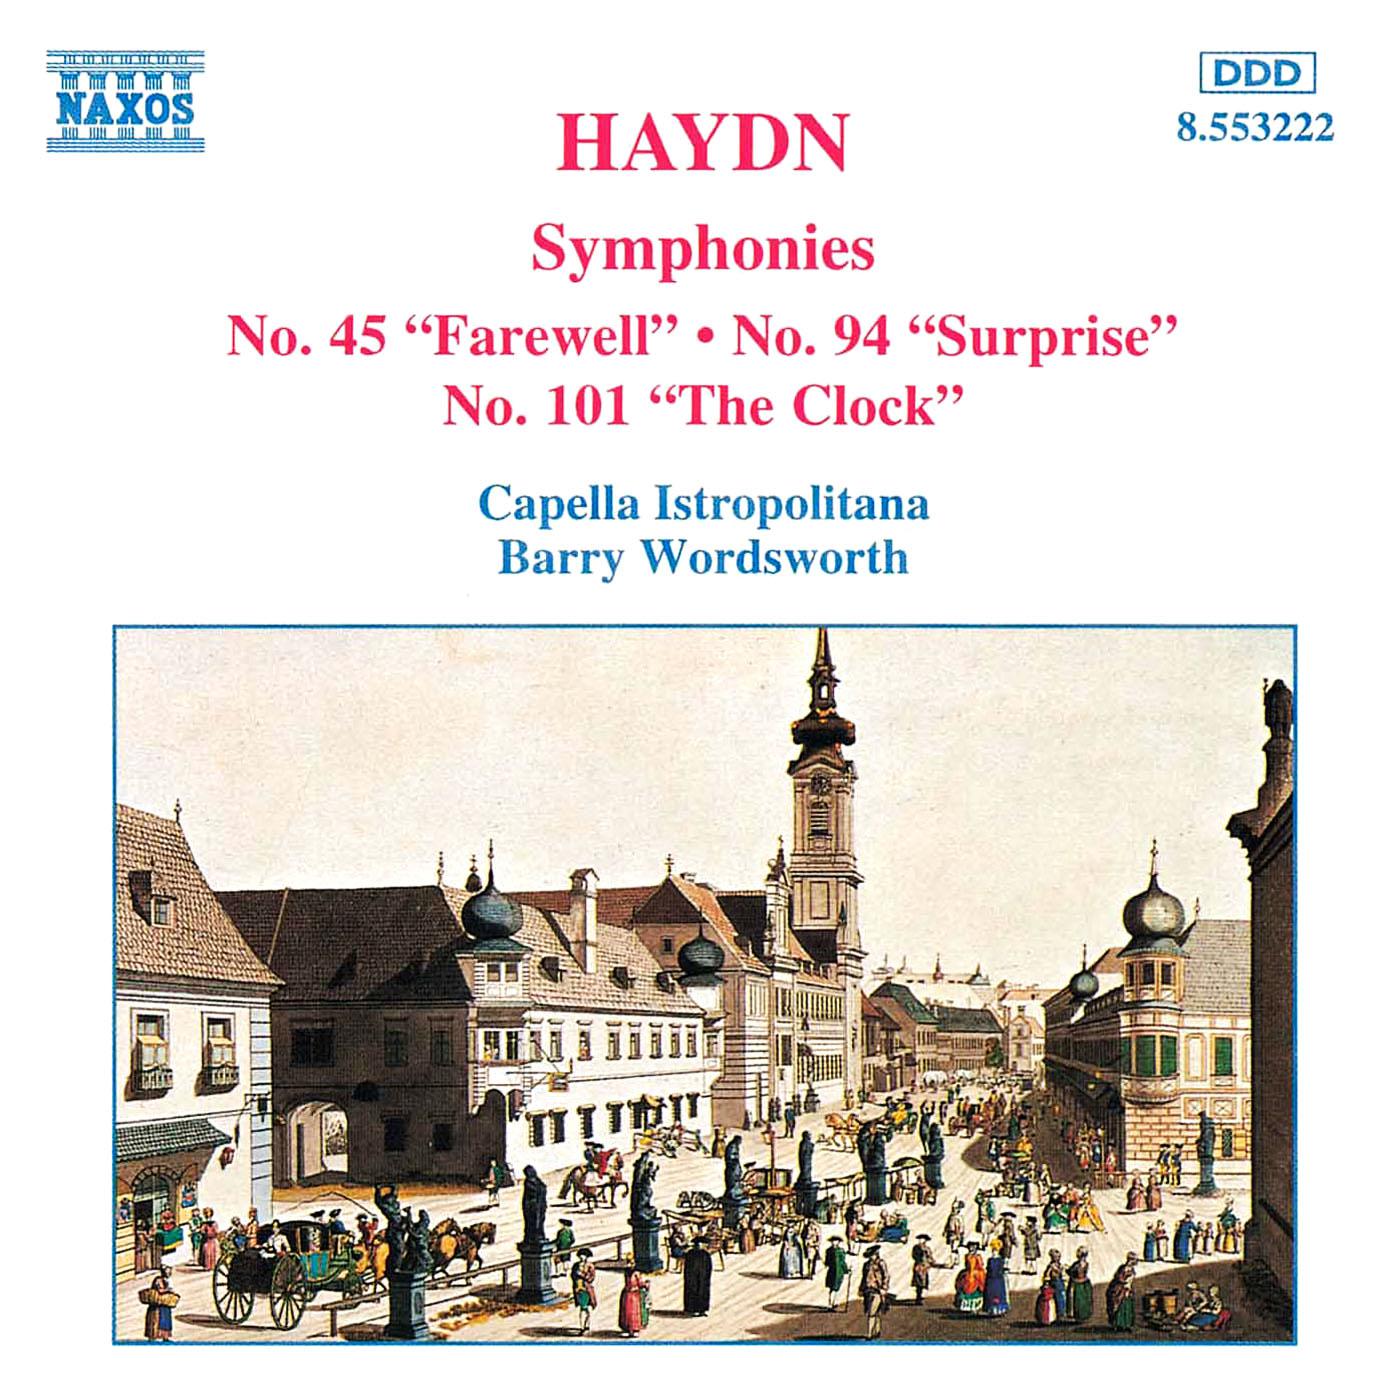 HAYDN: Symphonies Nos. 45, 94 and 101